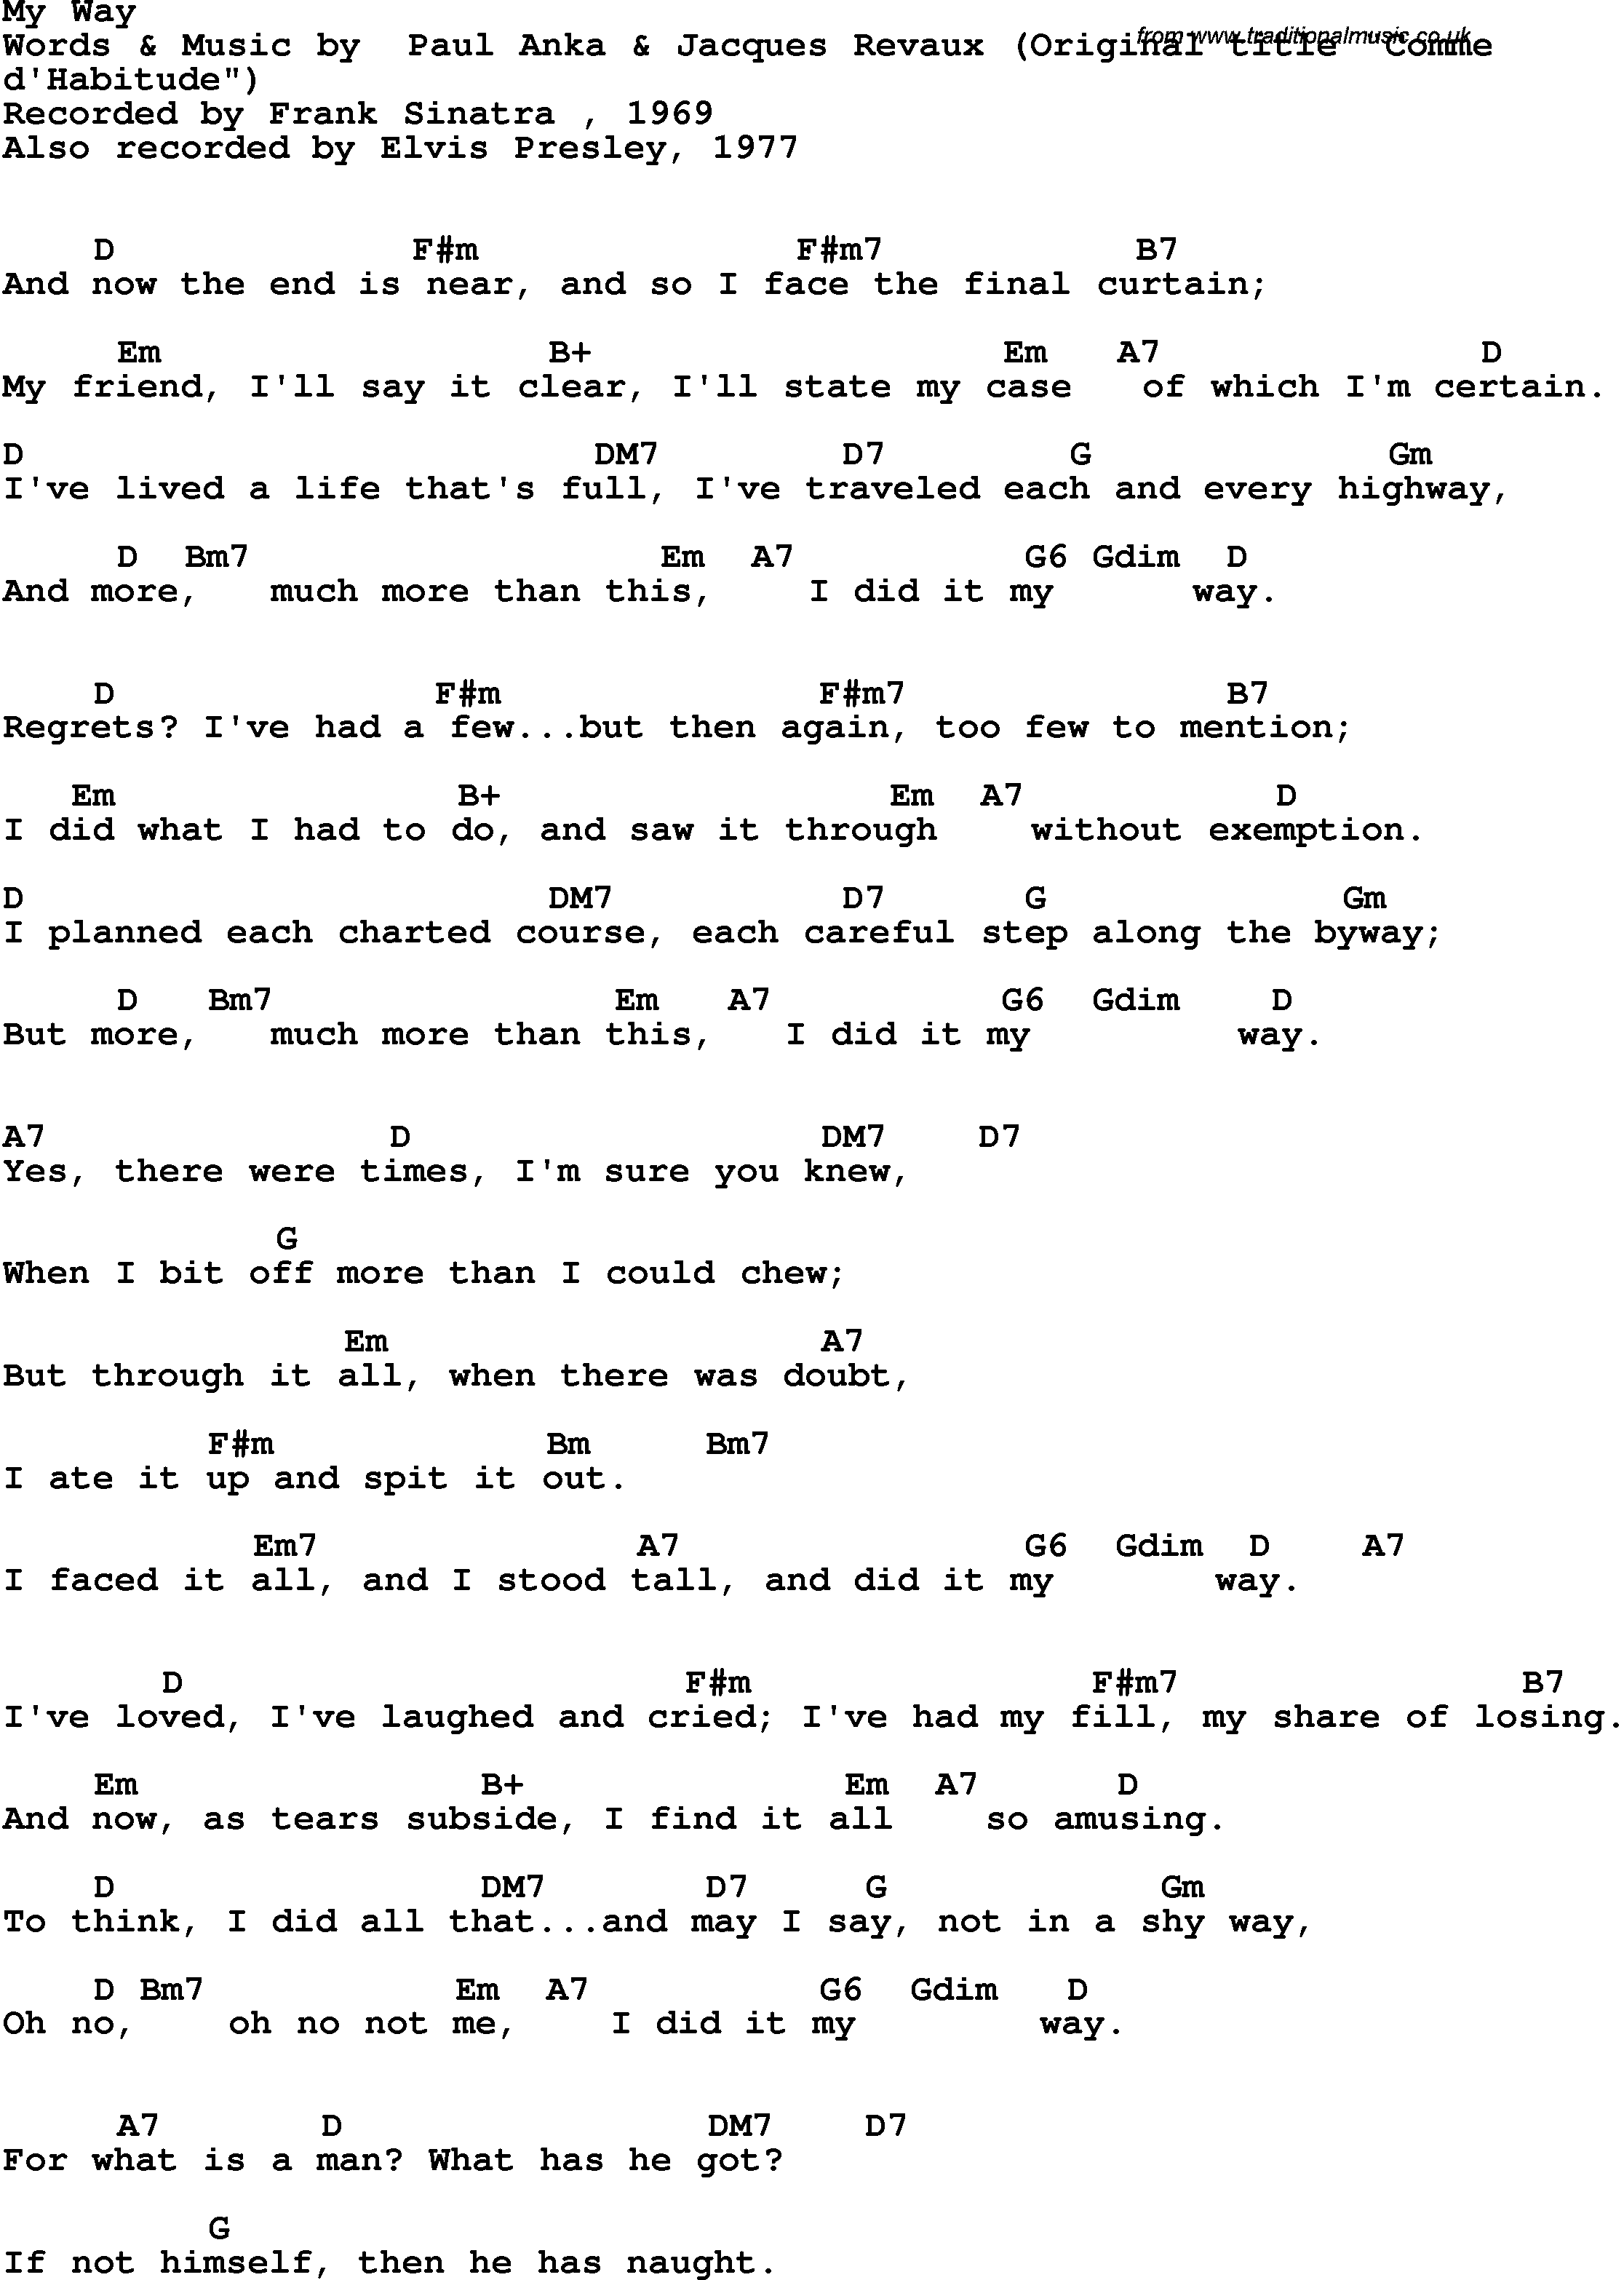 Song lyrics with guitar chords for My Way - Frank Sinatra, 1969